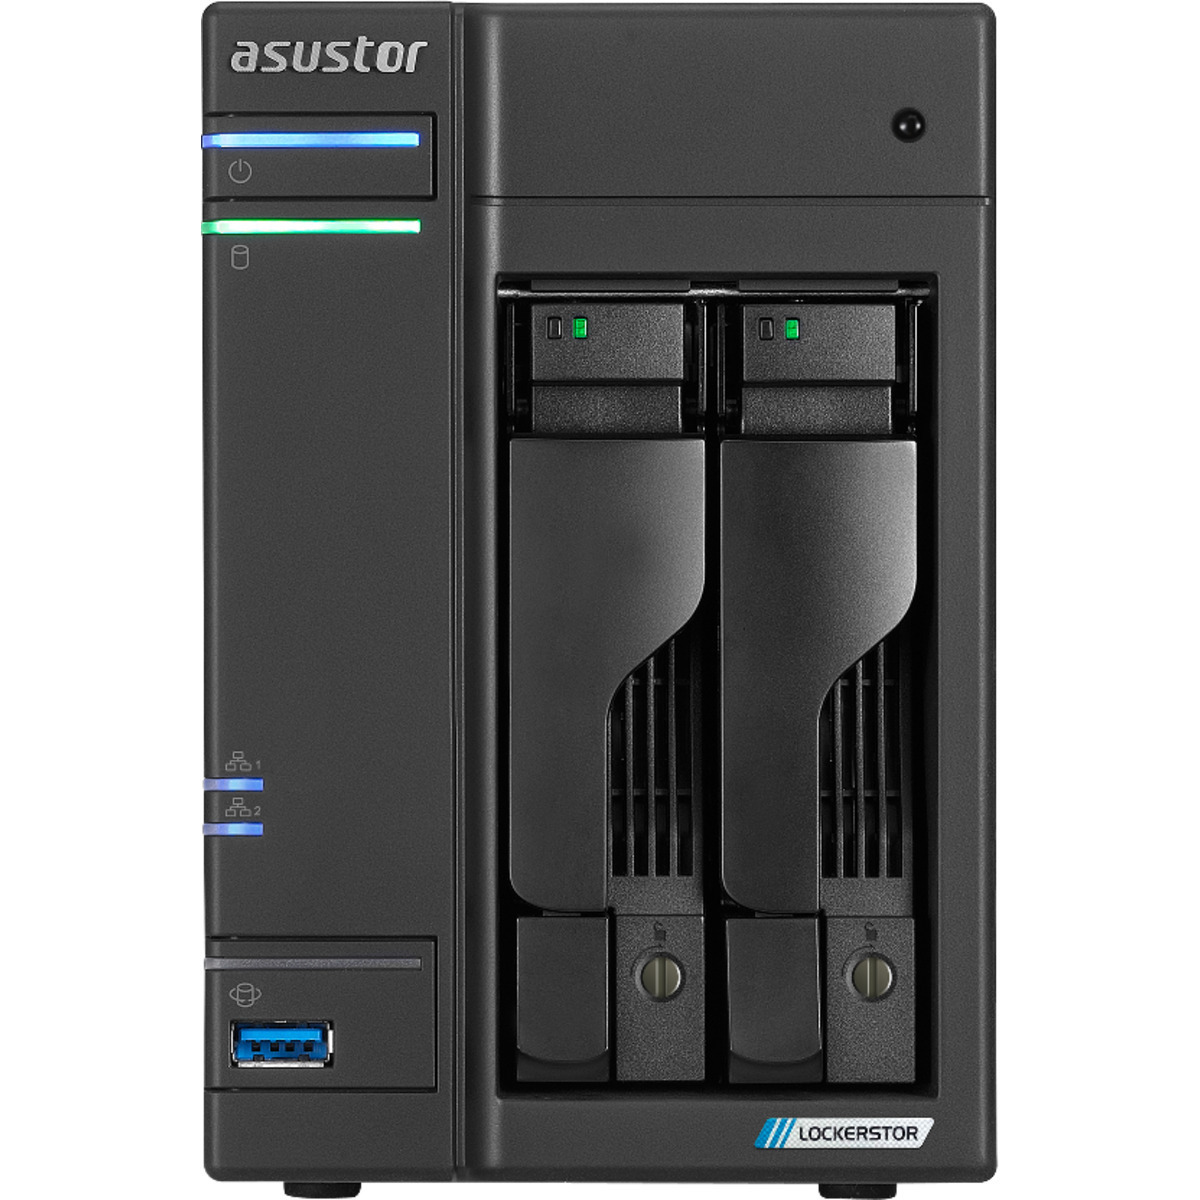 buy $671 ASUSTOR LOCKERSTOR 2 Gen2 AS6702T 8tb Desktop NAS - Network Attached Storage Device 2x4000gb Toshiba MN Series MN08ADA400E 3.5 7200rpm SATA 6Gb/s HDD NAS Class Drives Installed - Burn-In Tested - ON SALE - FREE RAM UPGRADE - nas headquarters buy network attached storage server device das new raid-5 free shipping simply usa LOCKERSTOR 2 Gen2 AS6702T